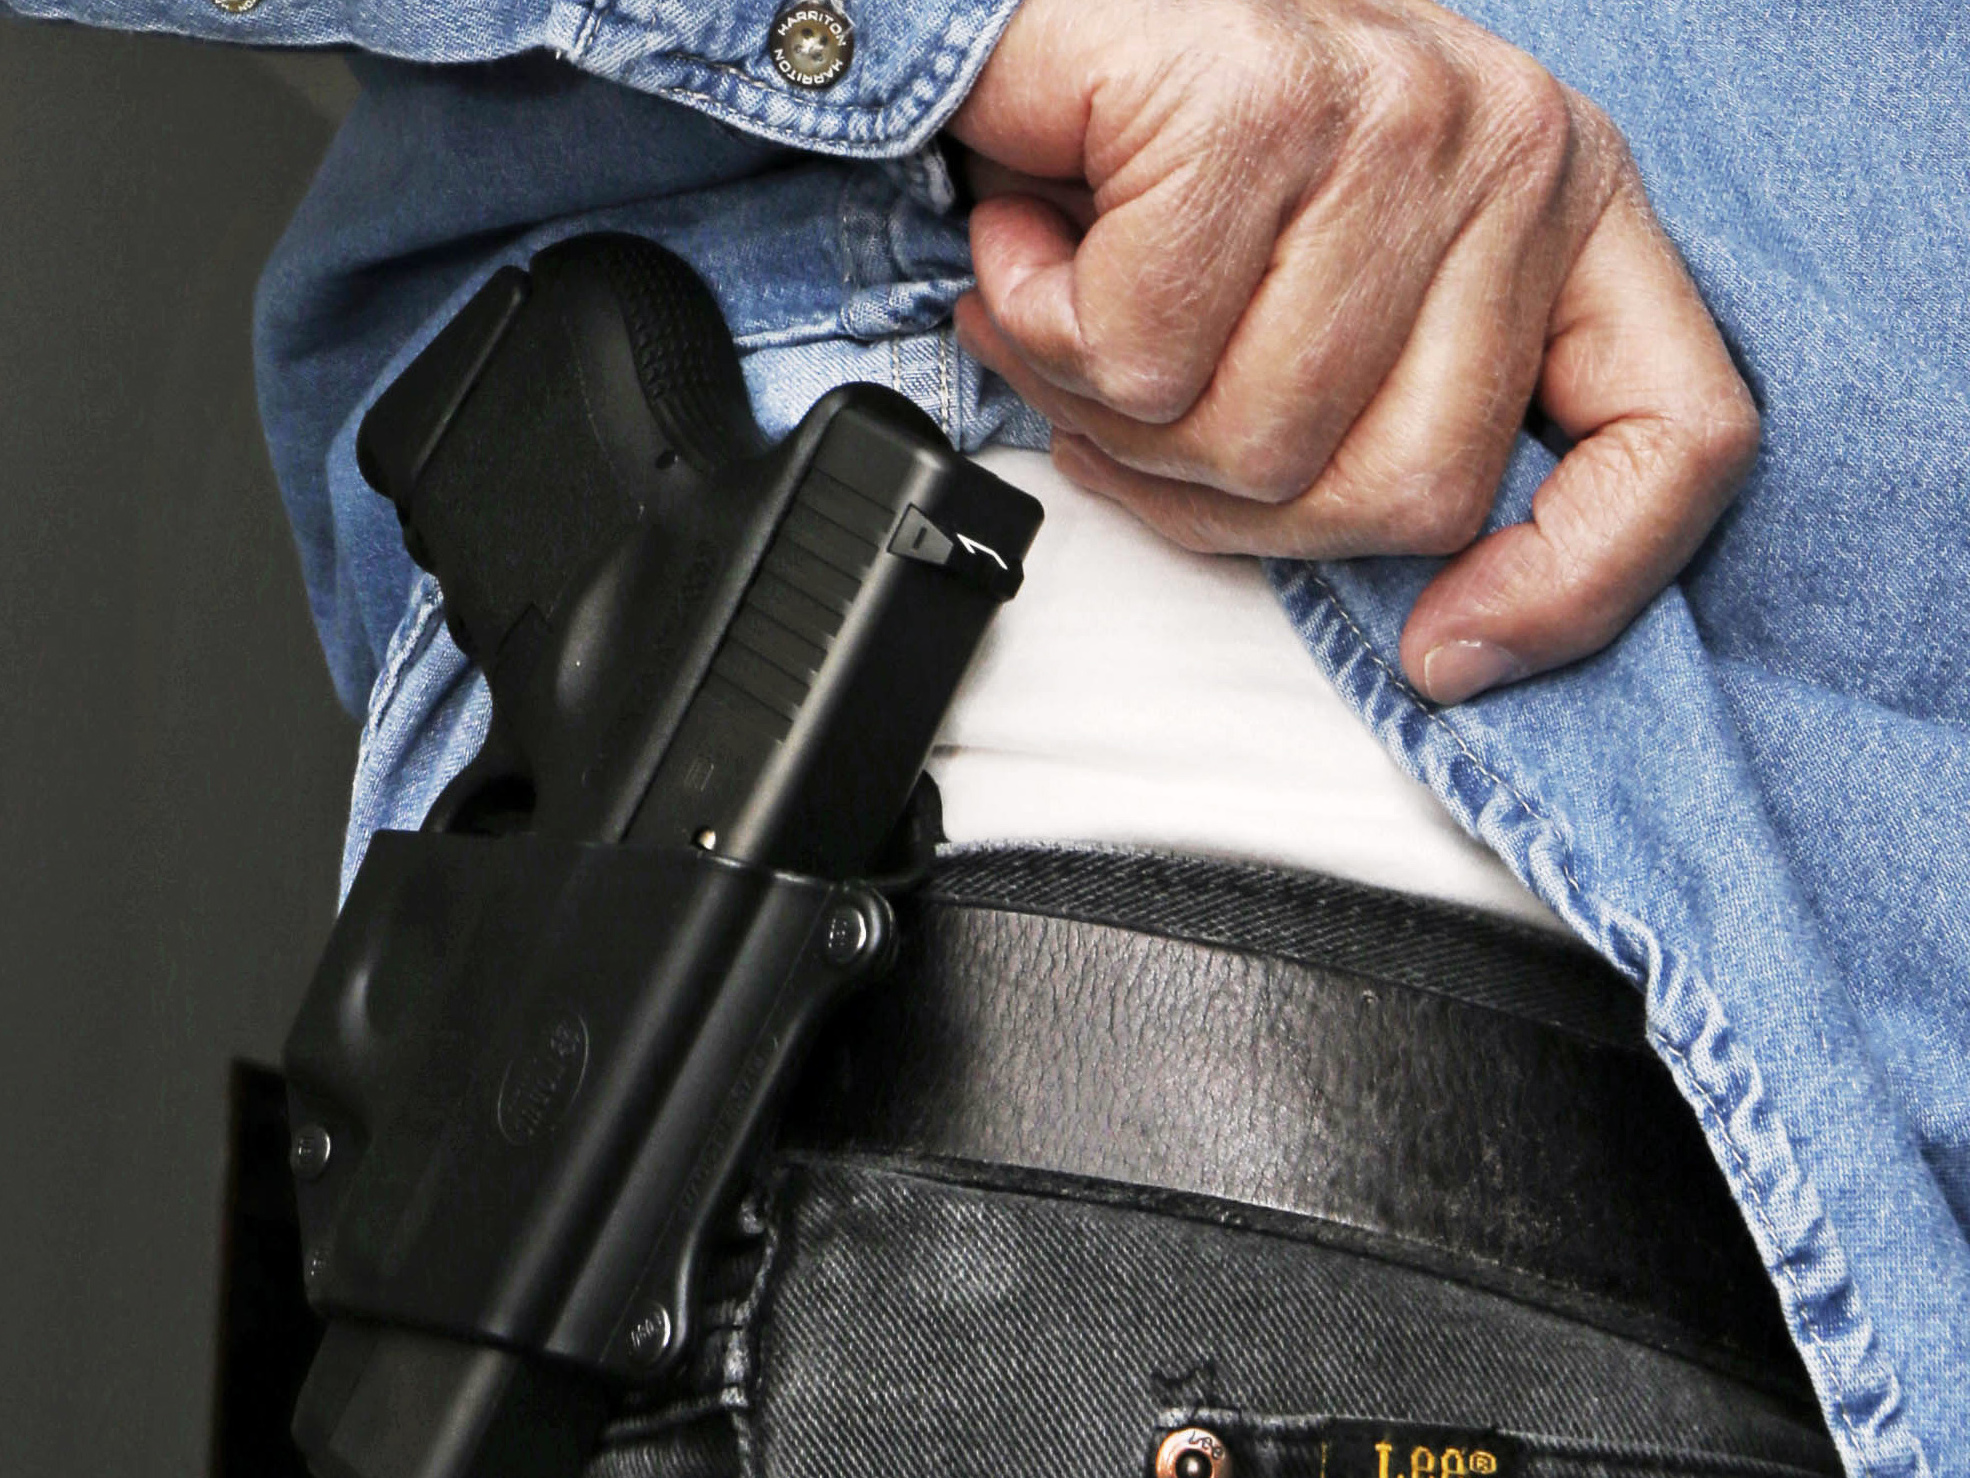 After High Court's action, a MD bill to tighten our concealed carry law